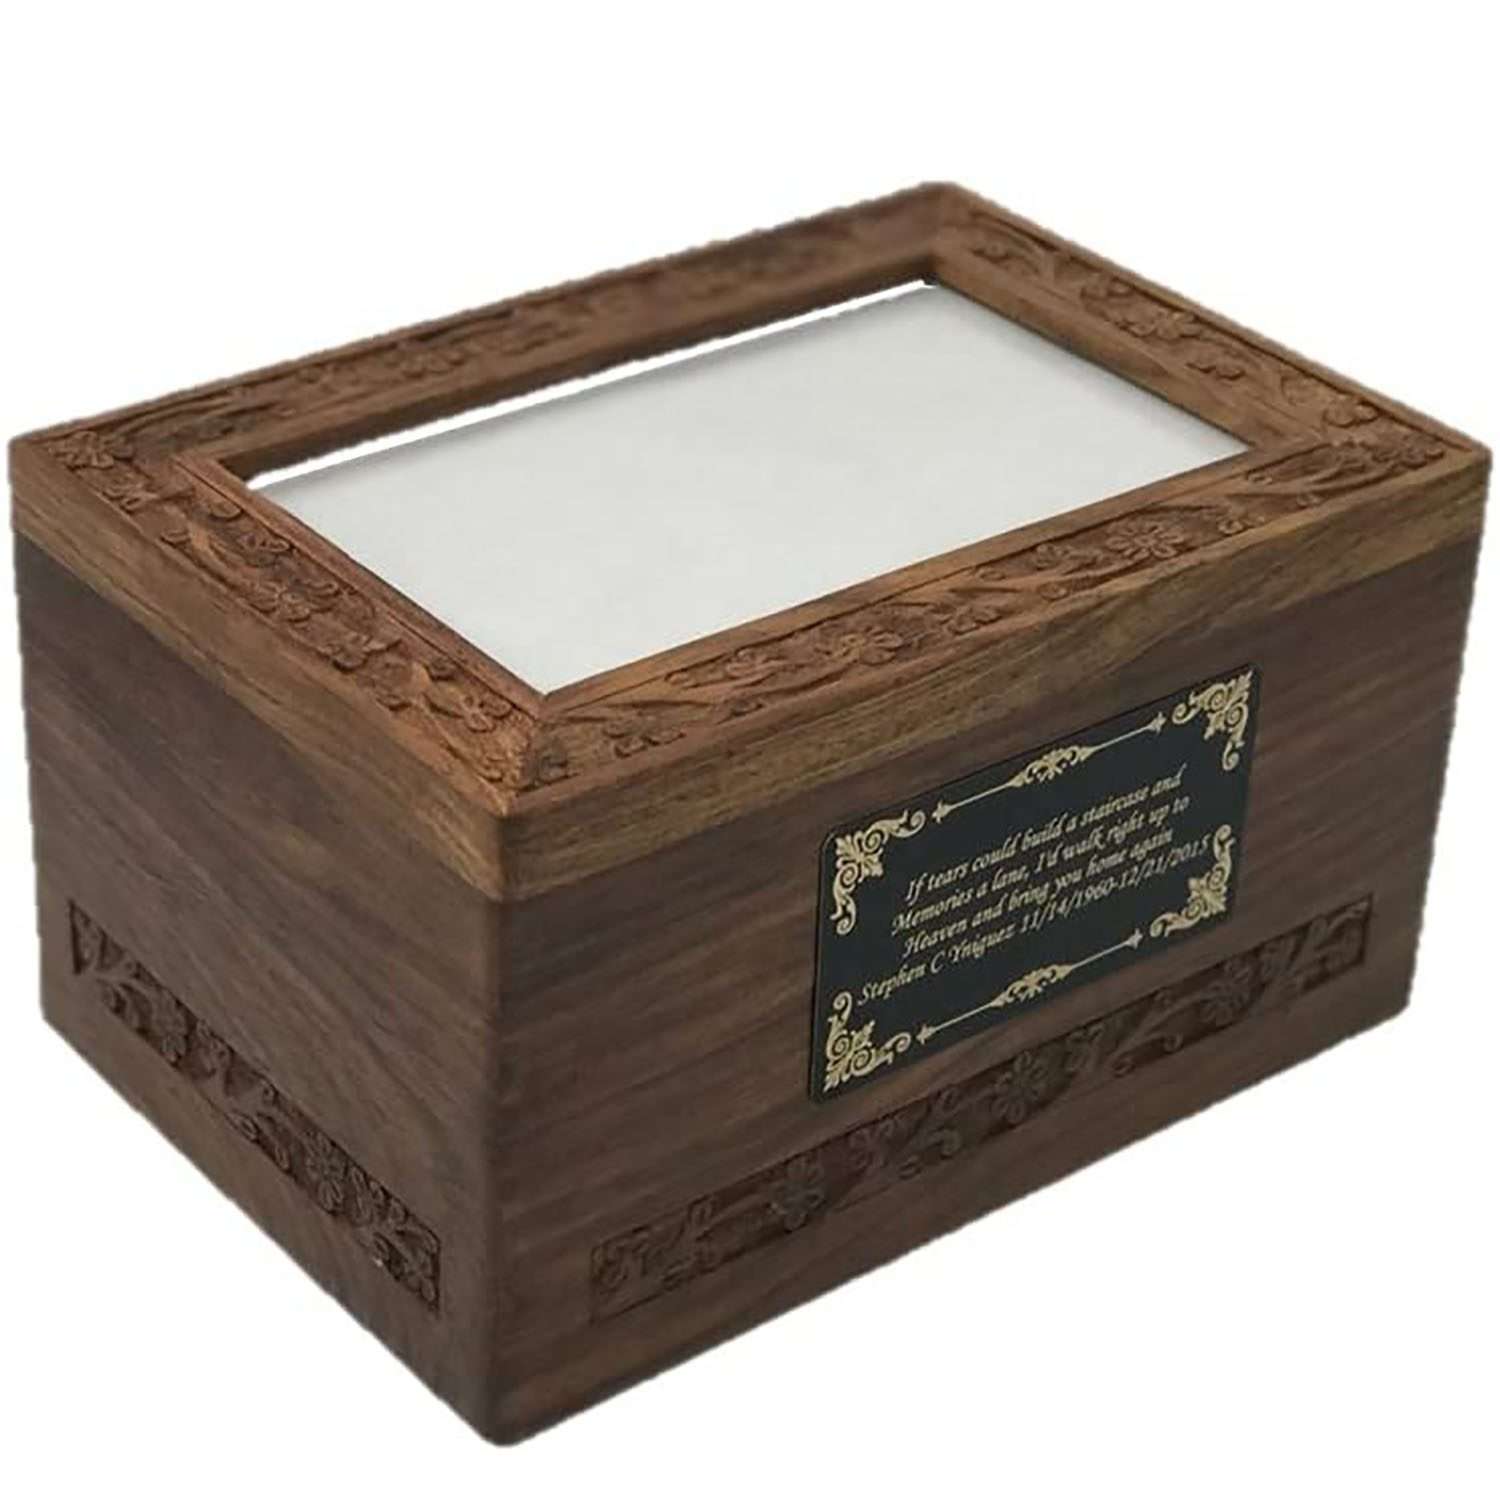 Large Wooden Funeral Cremation Urn Box | Photo Cremation Urn Boxes with Custom Engraving